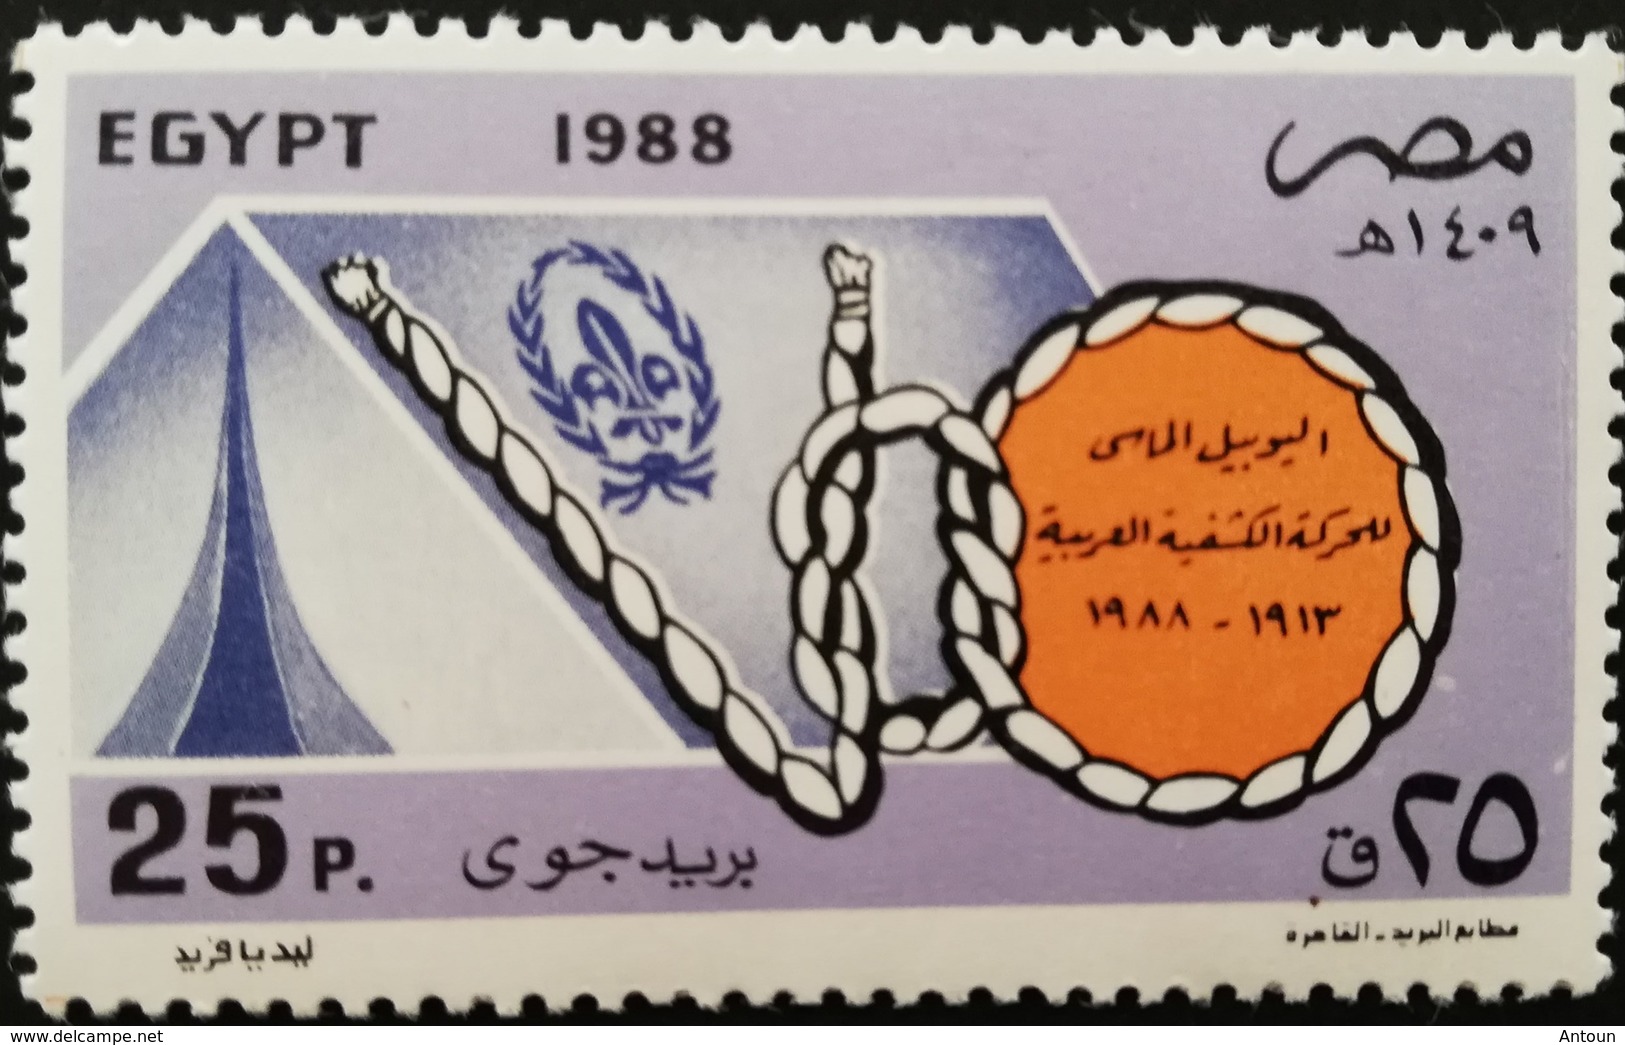 Egypt 1988 Arab Scouting Organization  POSTAGE TO BE ADDED ON ALL ITEMS - Nuovi